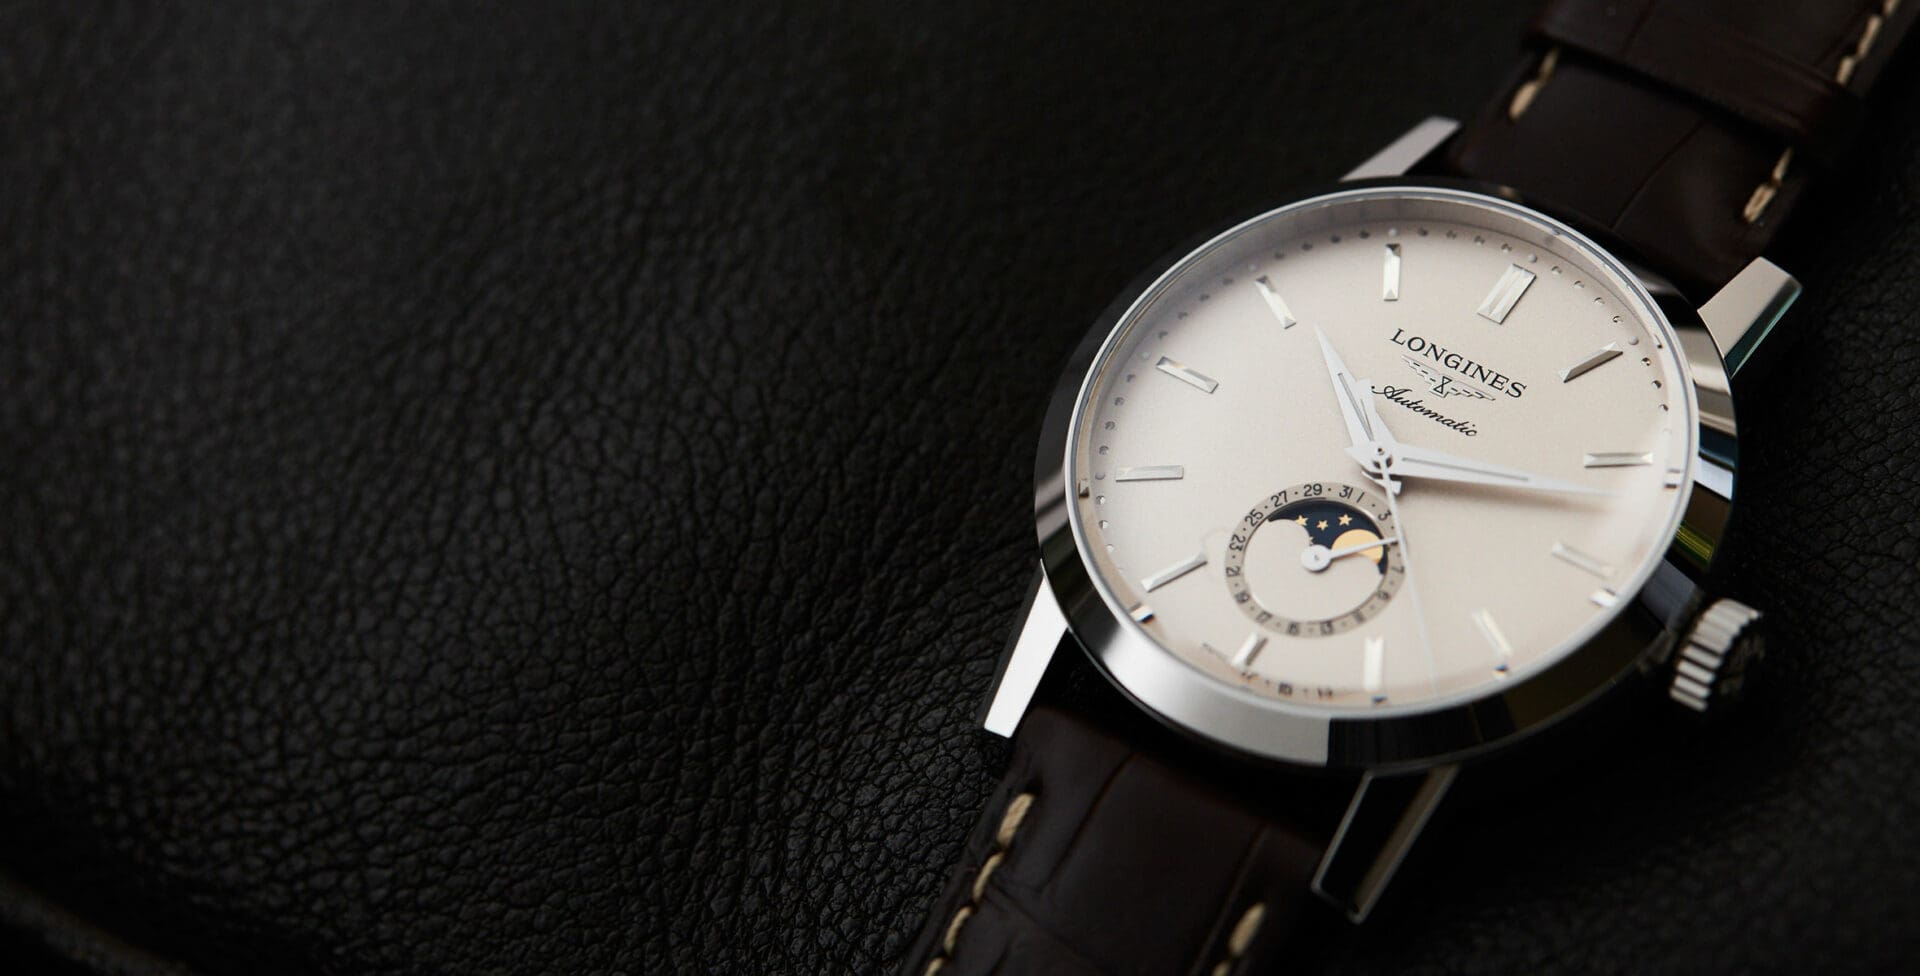 The old-world charms of the Longines 1832 Moonphase